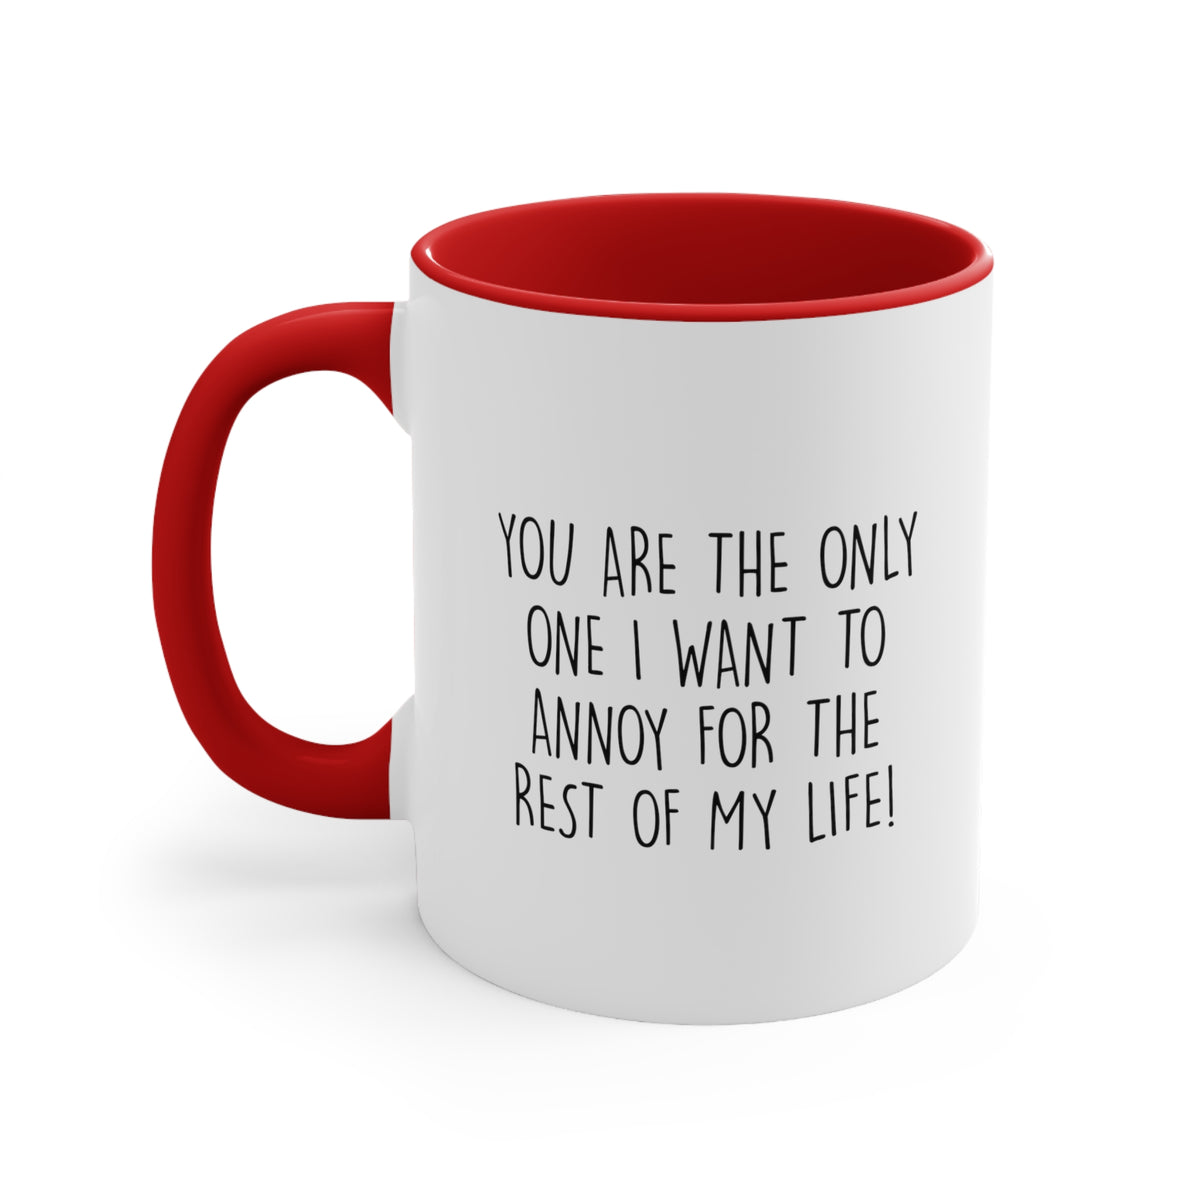 Valentins Day Mug, You Are The Only One I Want To Annoy For The Rest Of My Life, Funny For Him Her, Coffee Cup For Wife Husband